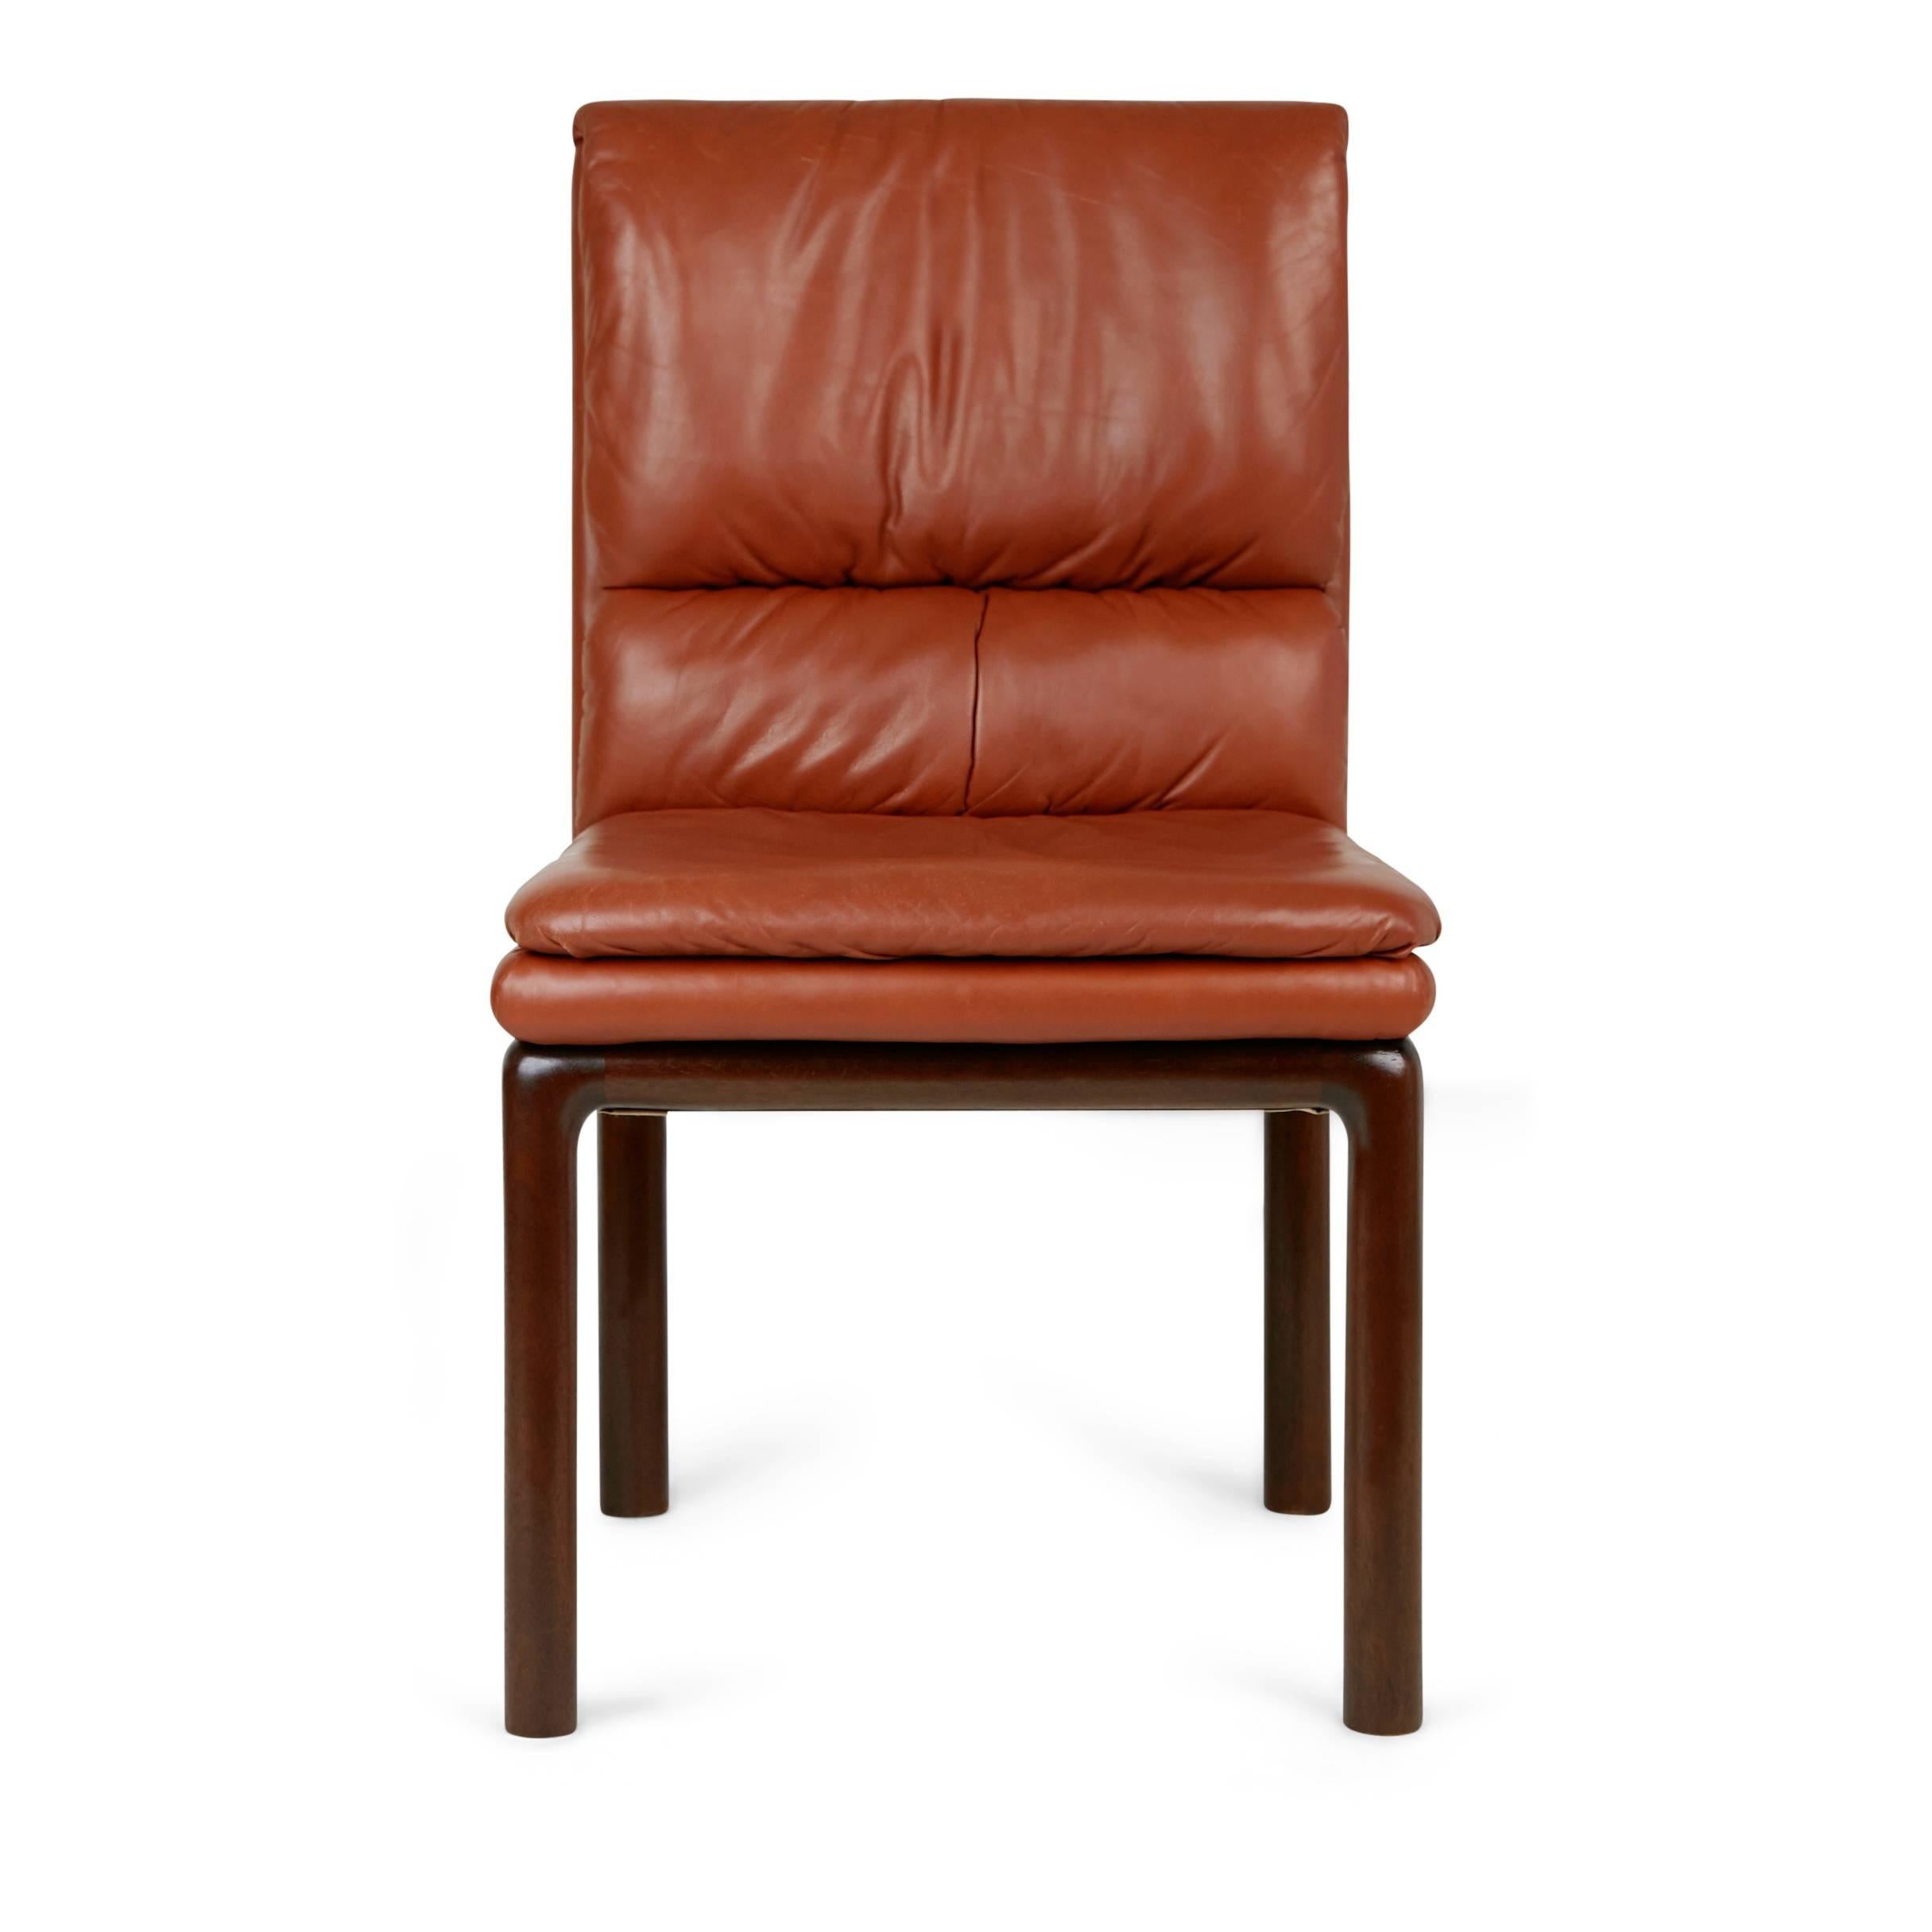 Handsome Edward Wormley side chair for Dunbar. This minimally designed occasional chair is upholstered in a rich medium toned brown leather with subtle ruched details on the backrest. The legs have been fabricated from mahogany and contrast